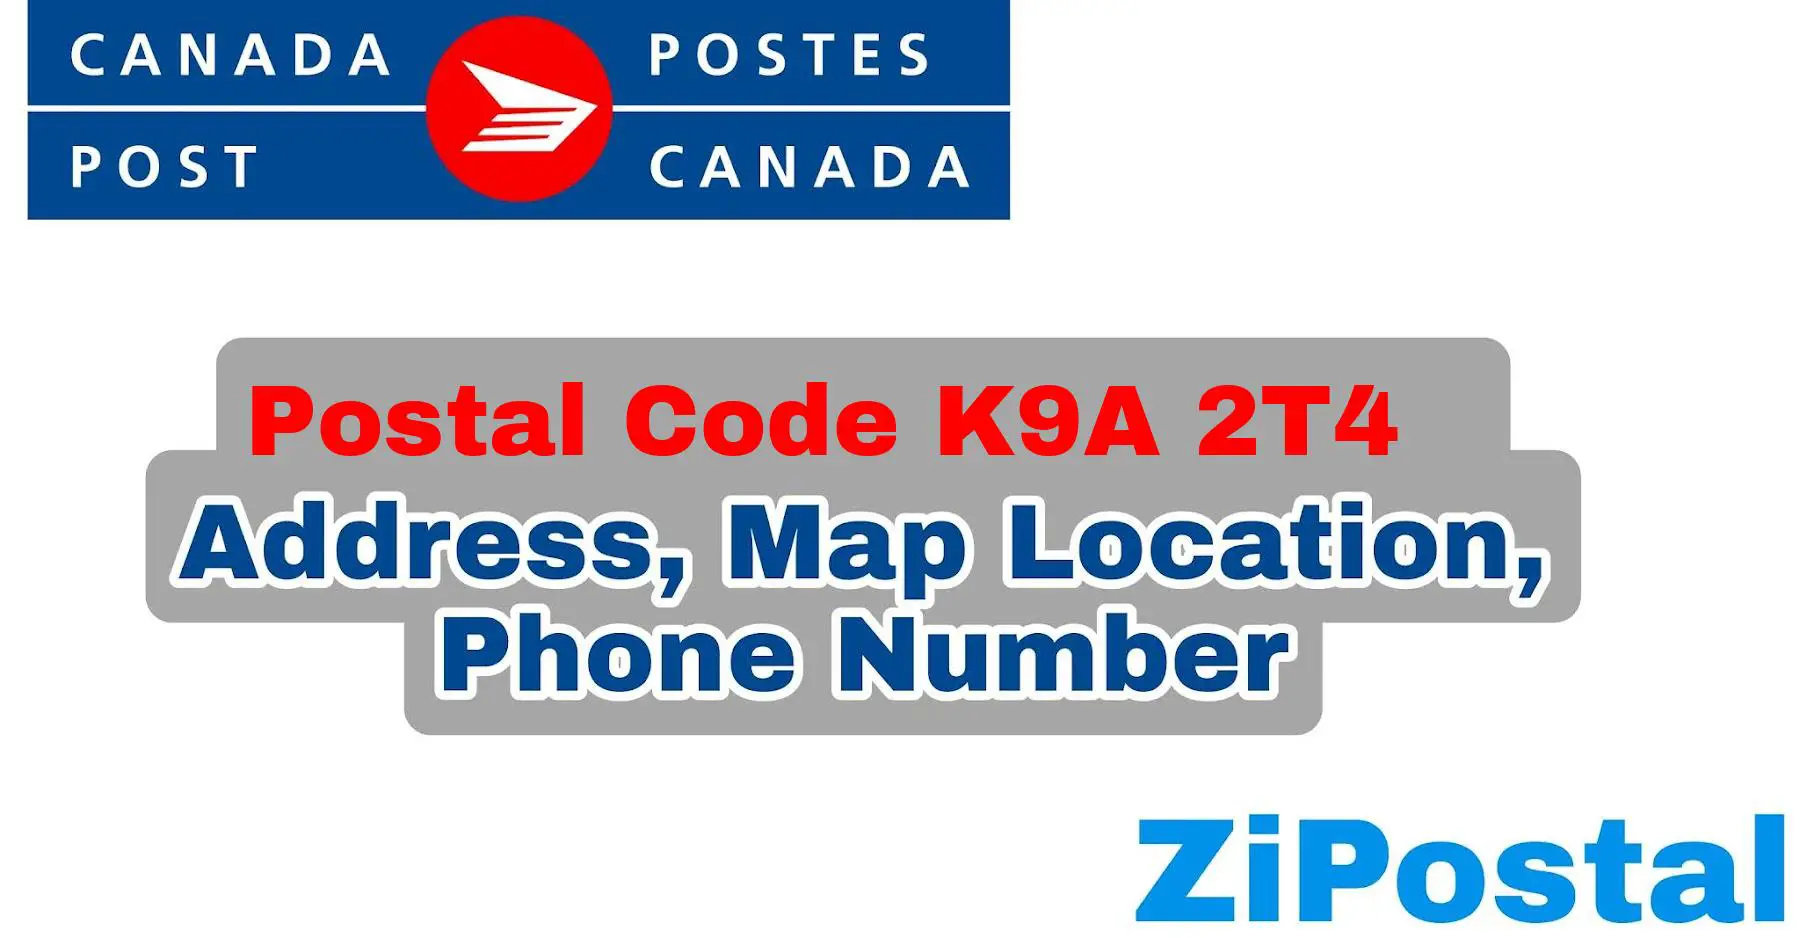 Postal Code K9A 2T4 Address Map Location and Phone Number